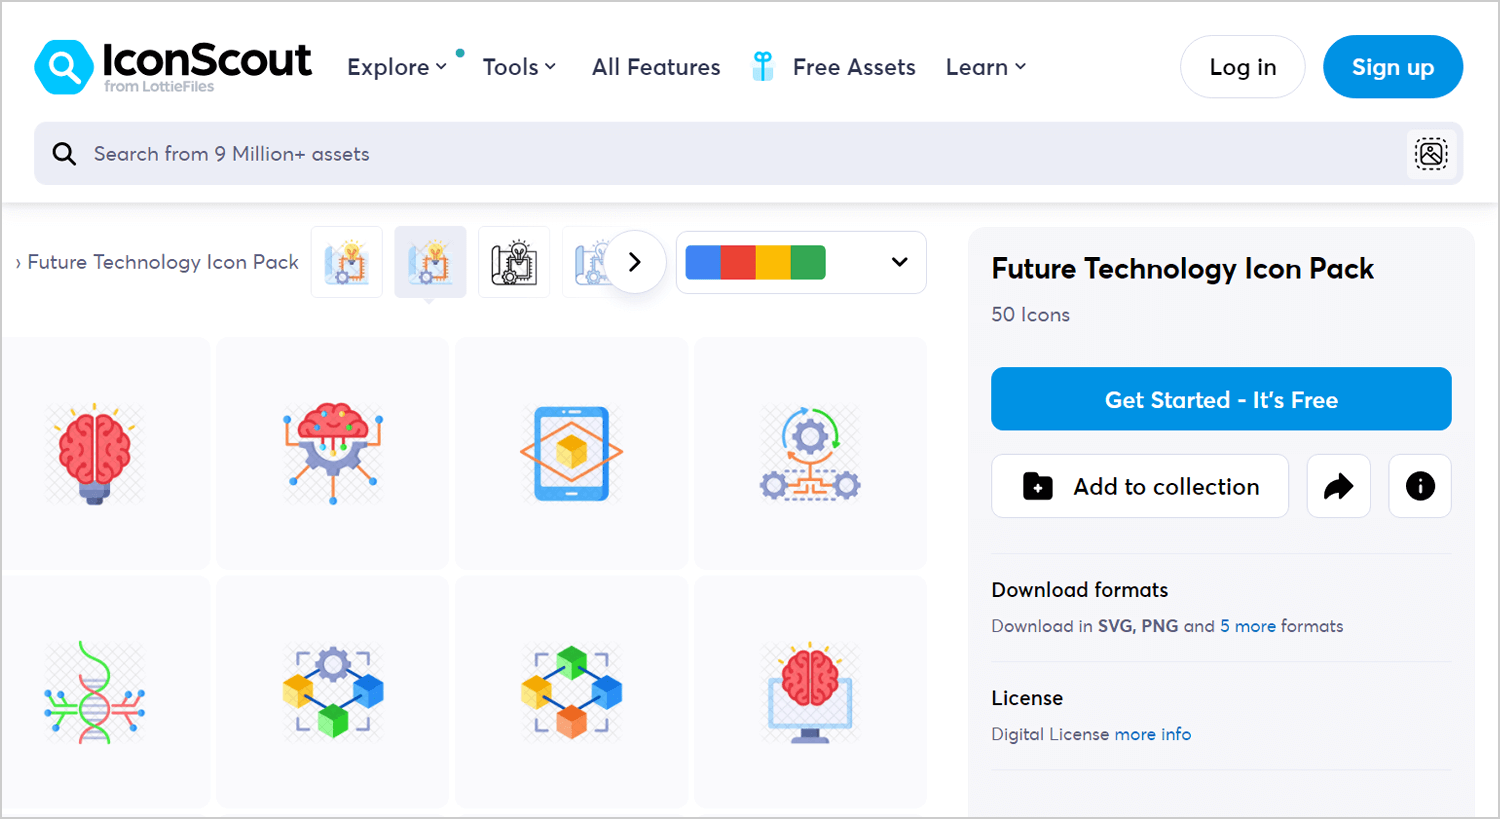 IconScout showing the Future Technology Icon Pack with 50 free icons, available in SVG, PNG, and more formats